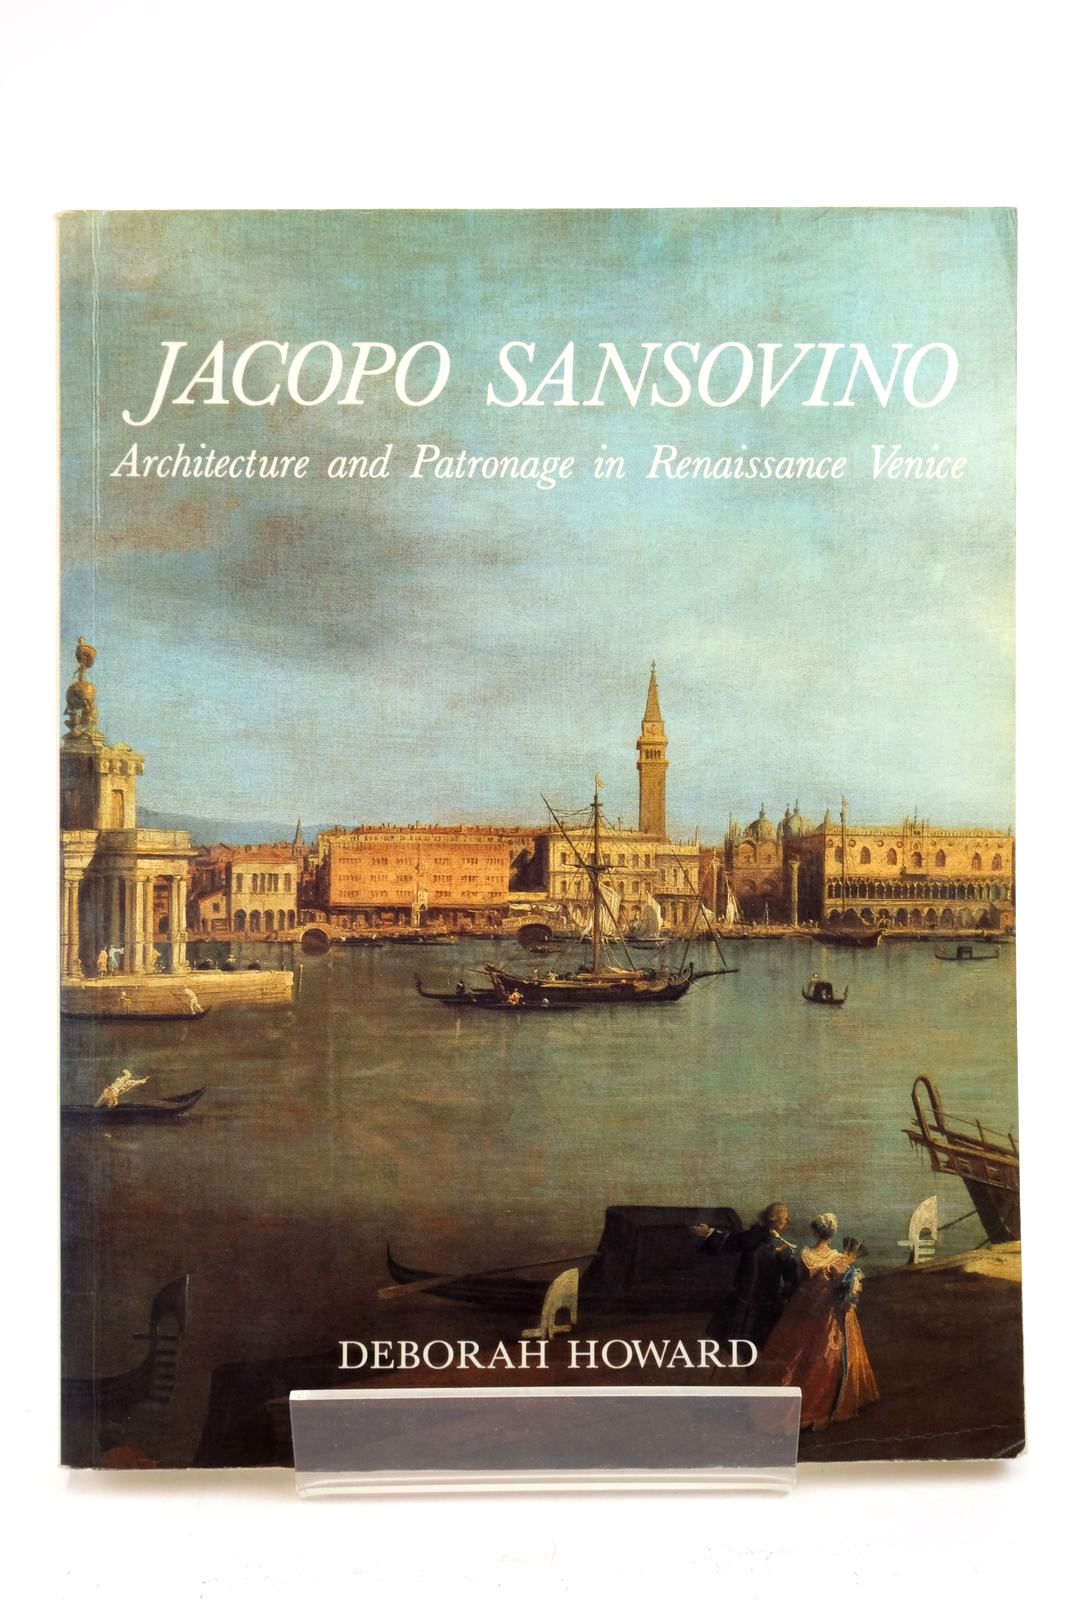 Photo of JACOPO SANSOVINO: ARCHITECTURE AND PATRONAGE IN RENAISSANCE VENICE written by Howard, Deborah published by Yale University Press (STOCK CODE: 2138926)  for sale by Stella & Rose's Books